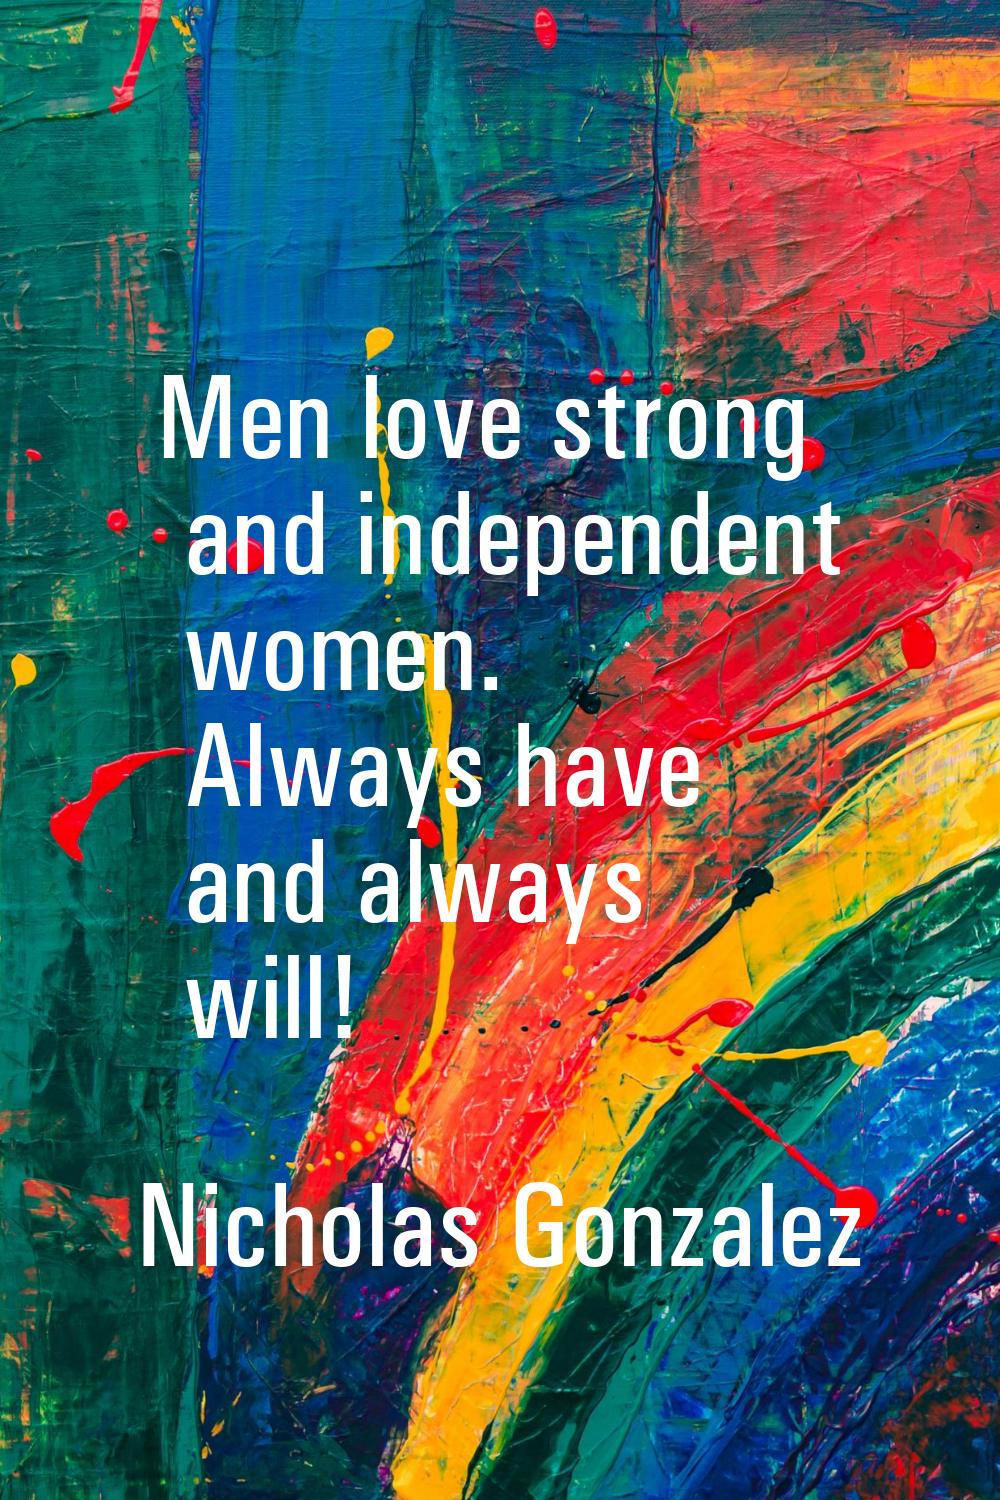 Men love strong and independent women. Always have and always will!